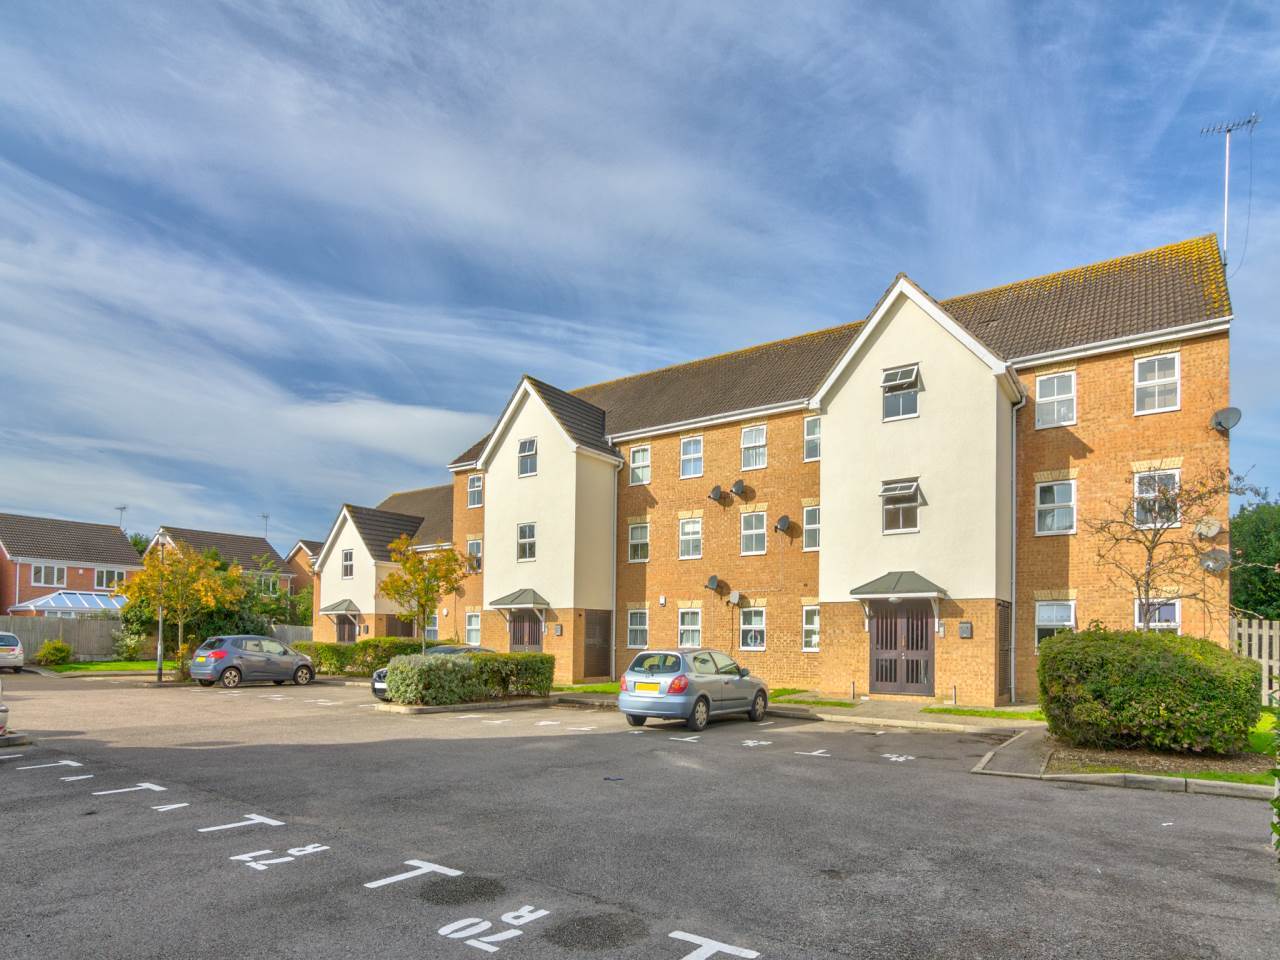 Lifestyle are pleased to market this 2 double bedroom apartment based within a quiet cul de sac in Waltham Abbey with excellent connections to the M25 and various other major roads.Property consists of spacious living room with separate kitchen that is fitted with all major appliances. Both bedrooms are good sizes with master including fitted wardrobes. Bathroom includes bath and shower and is full tiled.Other aspects include gas central heating, double glazed and allocated parking space.Years Remaining on Lease: 159
Service Charge: £1500.00 per annum
Ground Rent: £250.00 per annum
